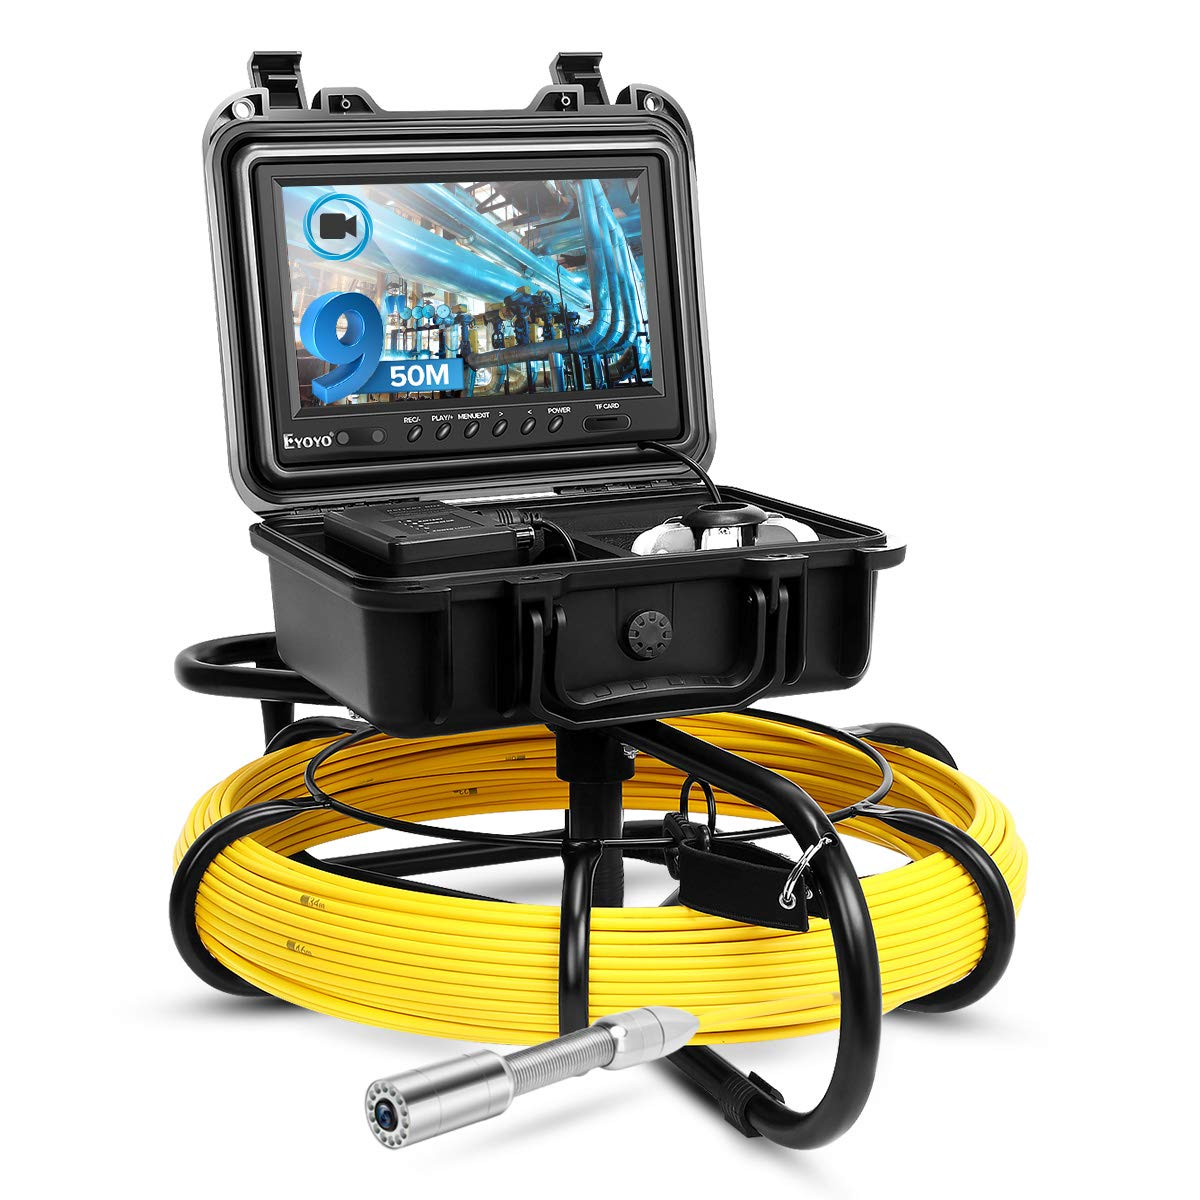 50 FT Pipe Inspection Camera USB Endoscope Video Sewer Drain Cleaner Waterproof 